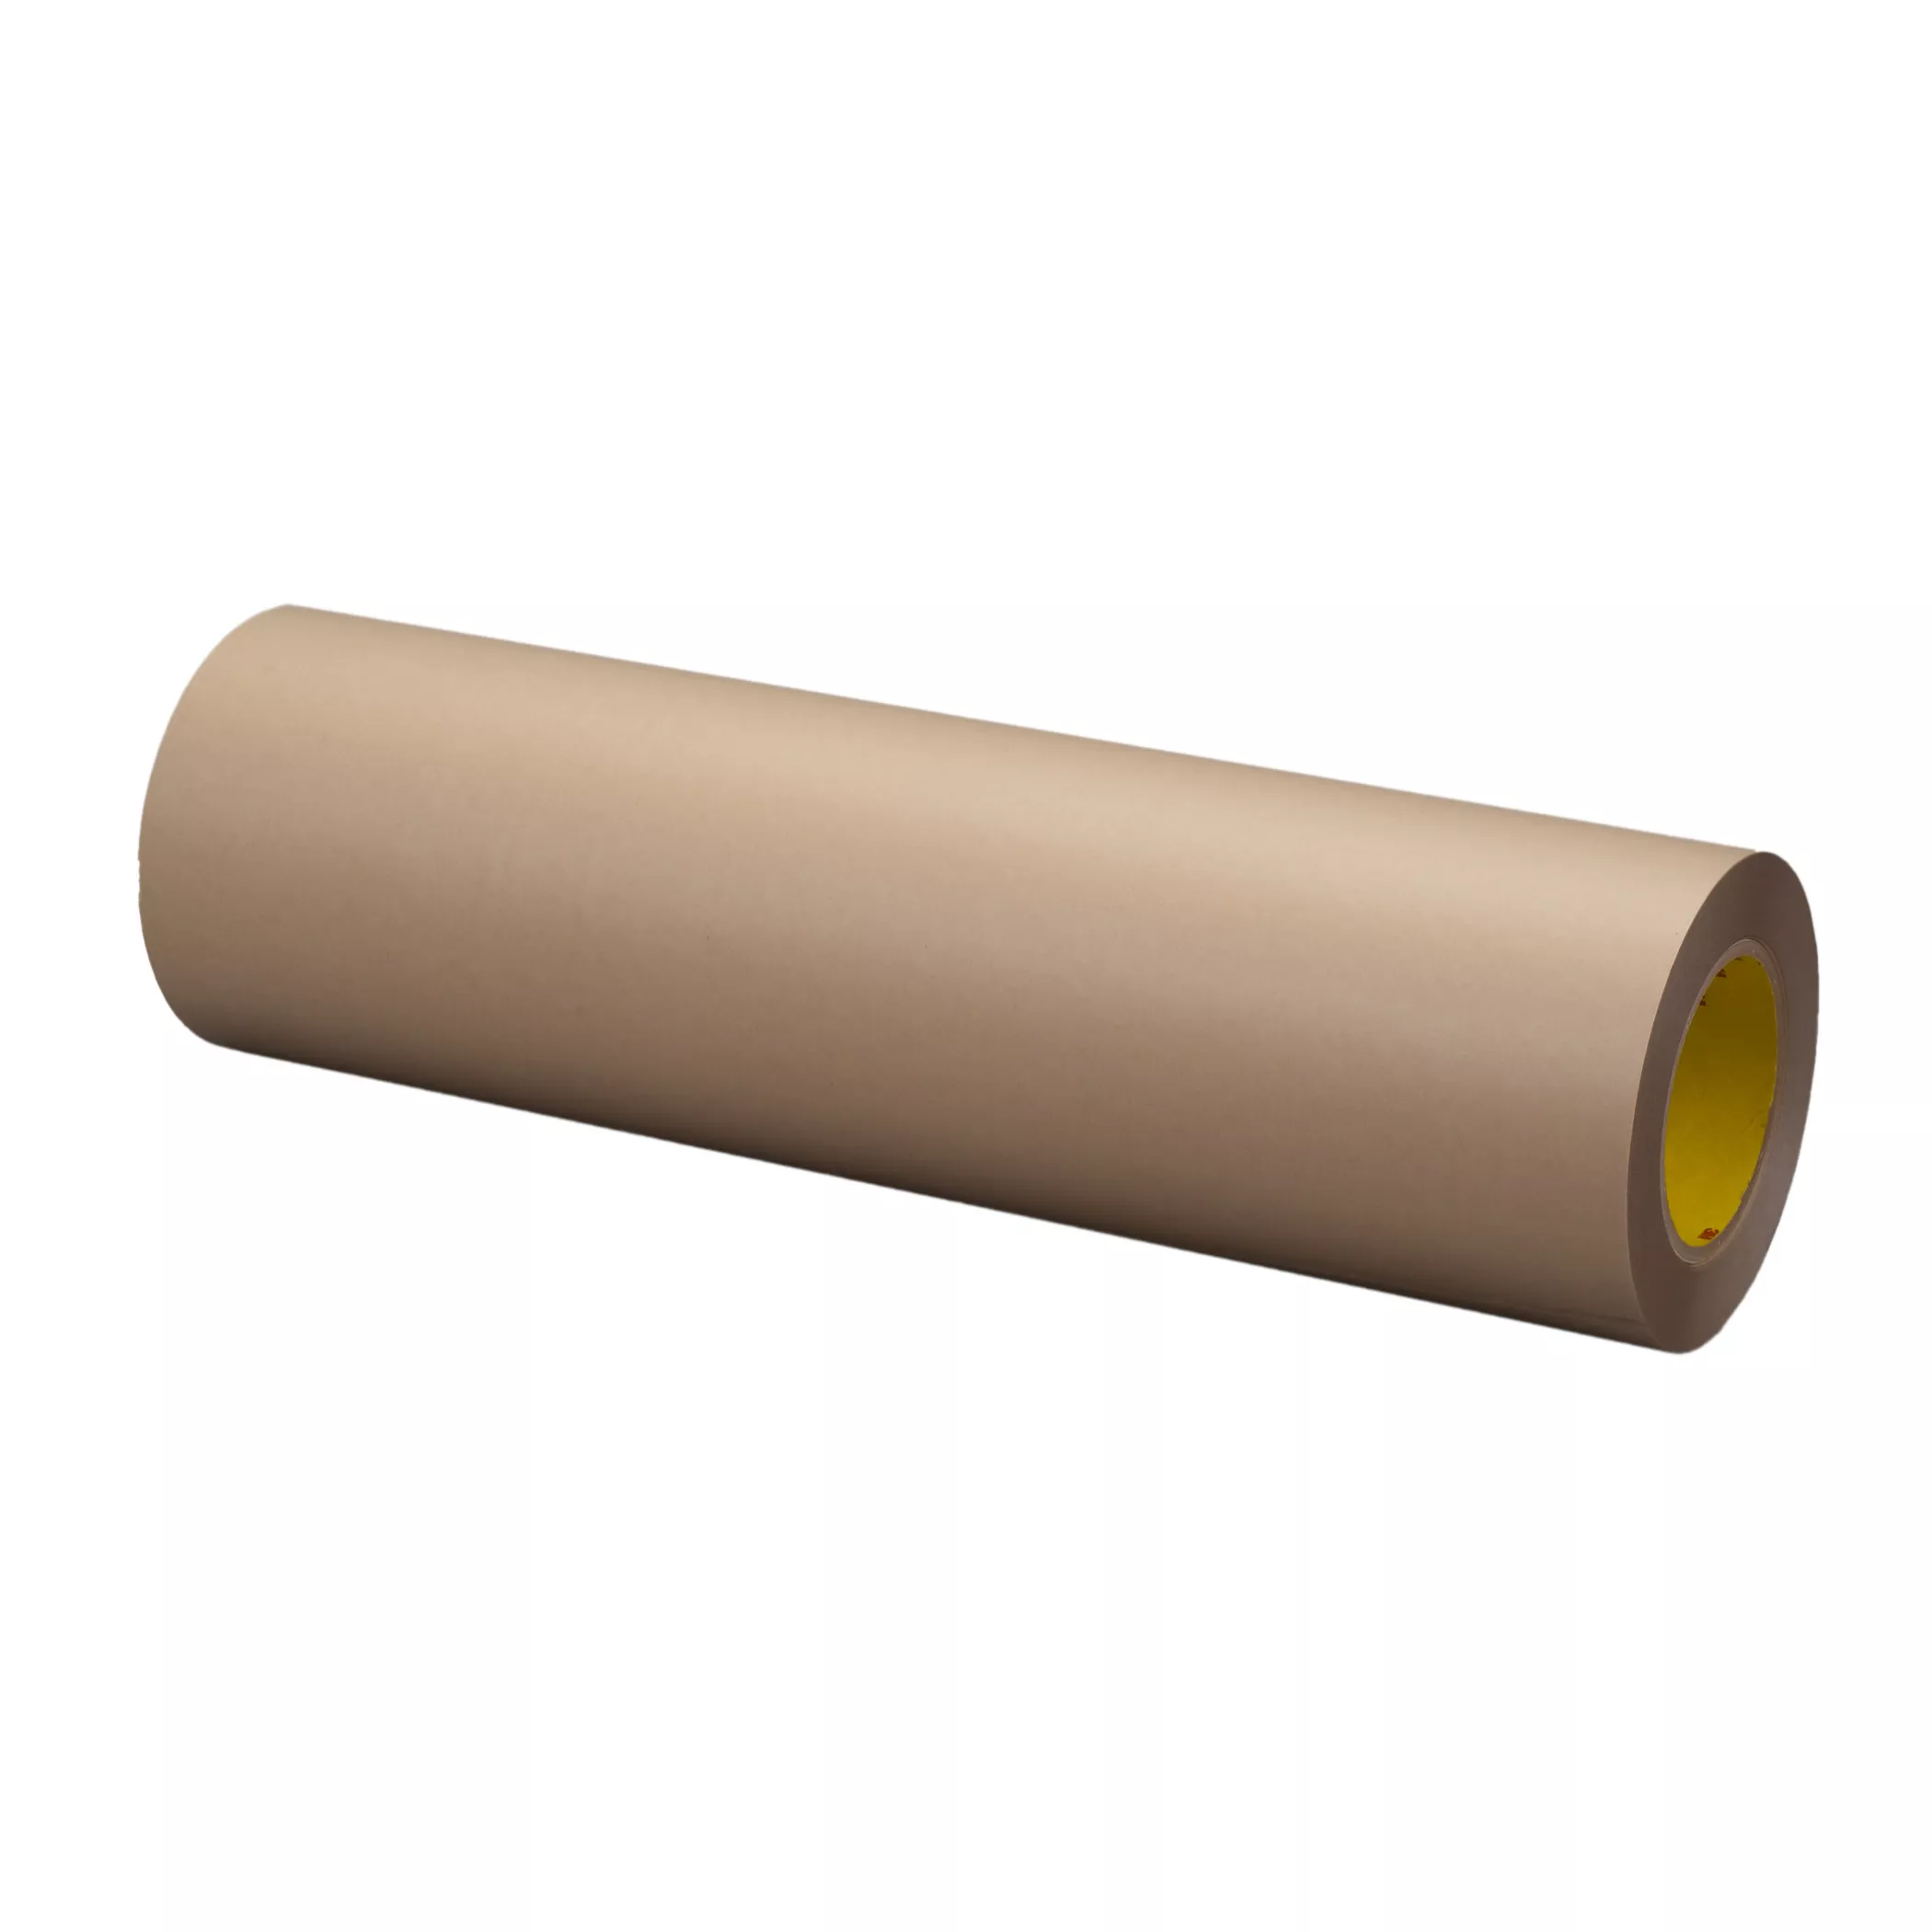 3M™ Thin Flexographic Plate Mounting Tape E2105, Translucent, 36 in x 36
yd, 5 mil, 1 Roll/Case